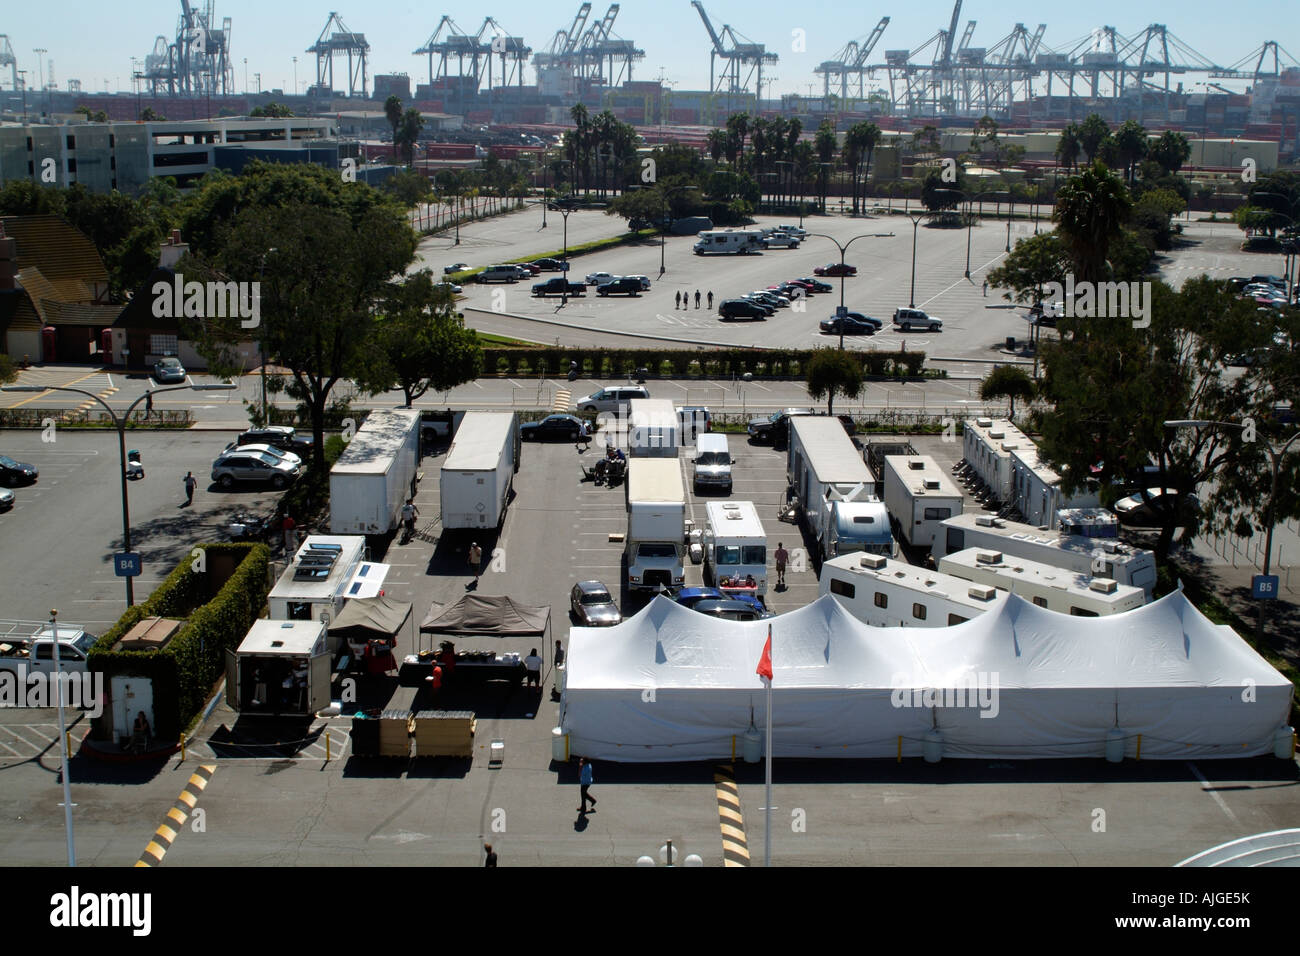 A Overview of a Film Set Support Crew and Trailers on Location Stock Photo